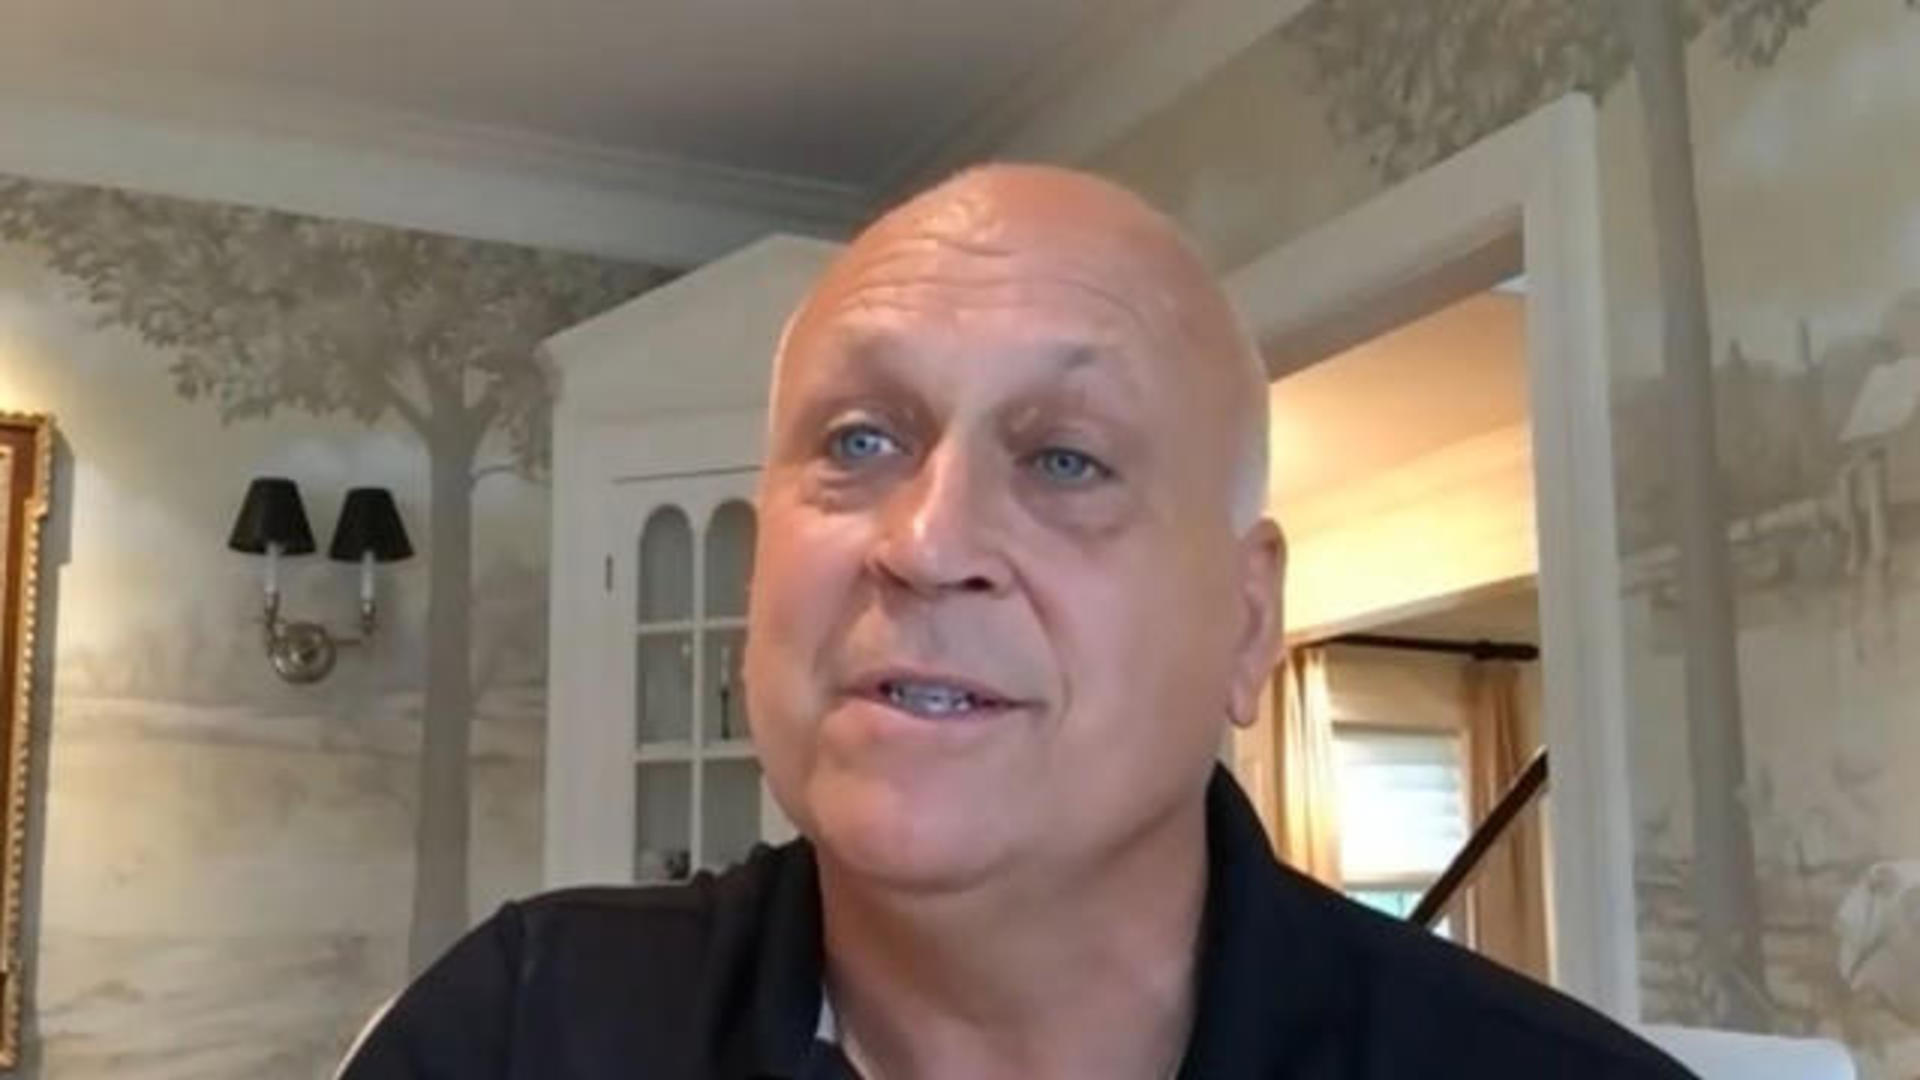 81 Cal Ripken Jr Wife Stock Photos, High-Res Pictures, and Images